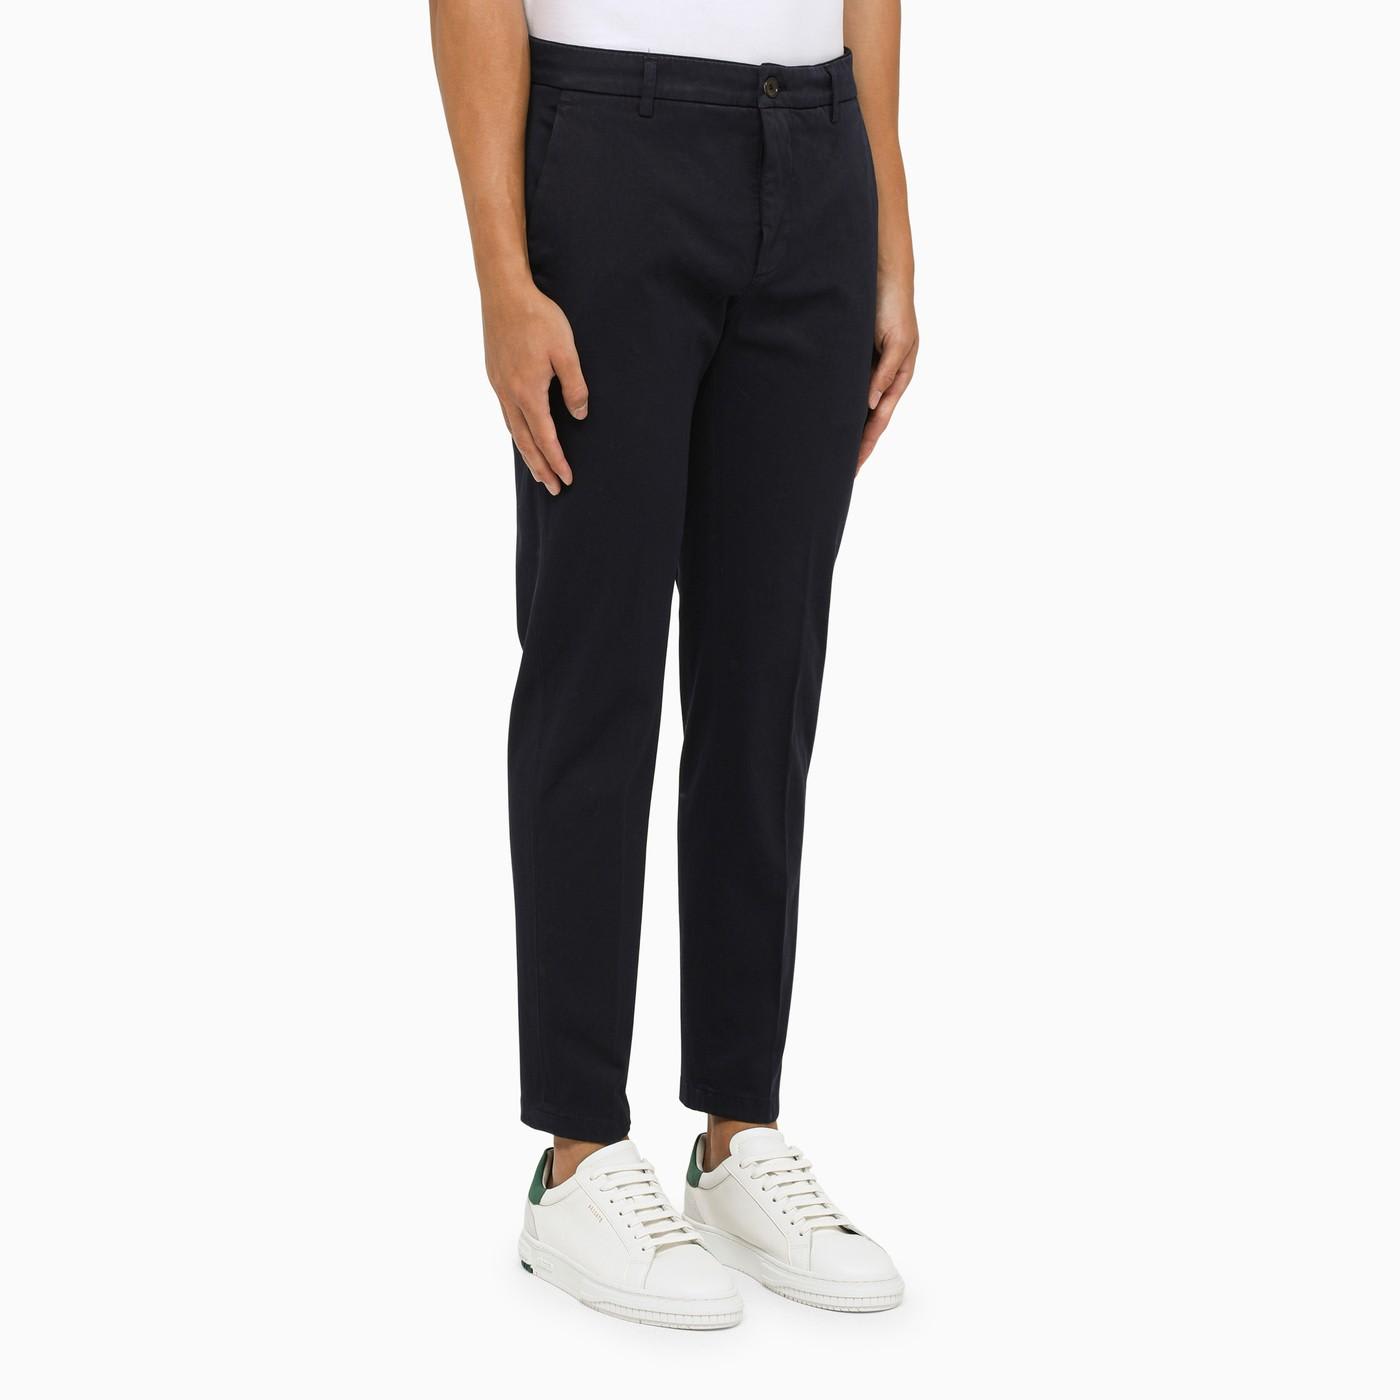 Shop Department Five Navy Stretch Cotton Chinos